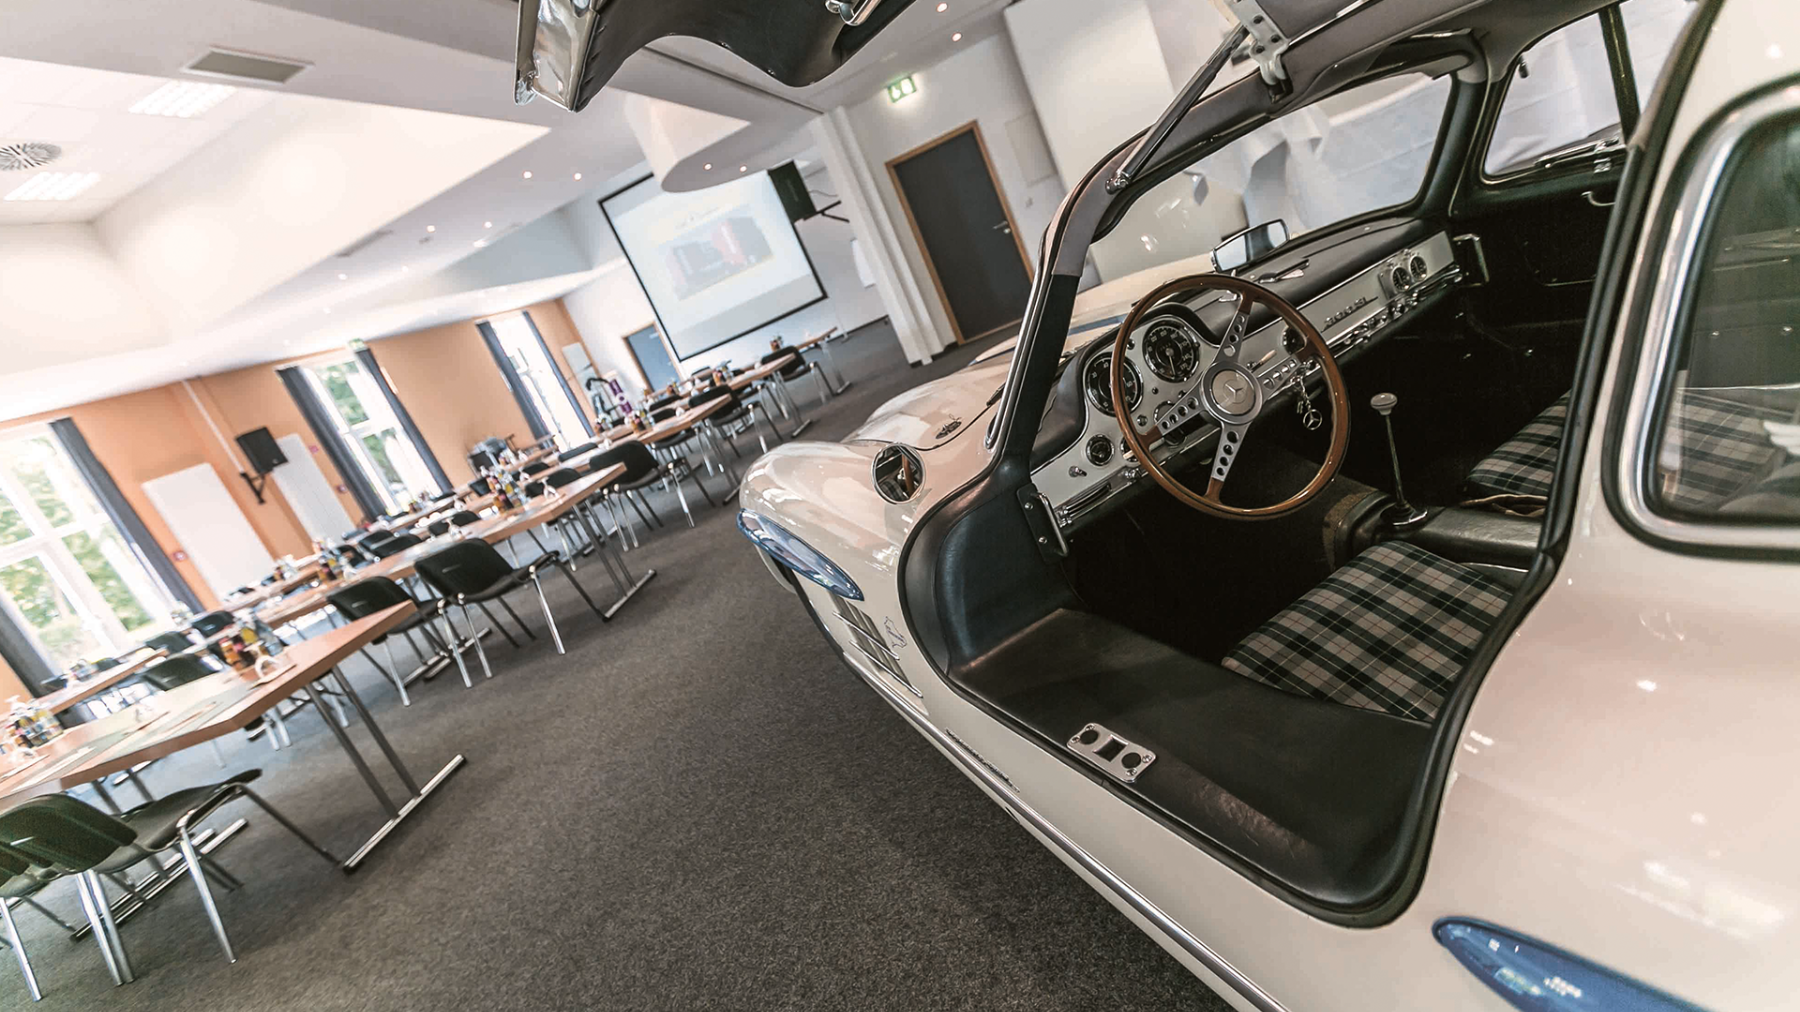 Big conference room with an oldtimer